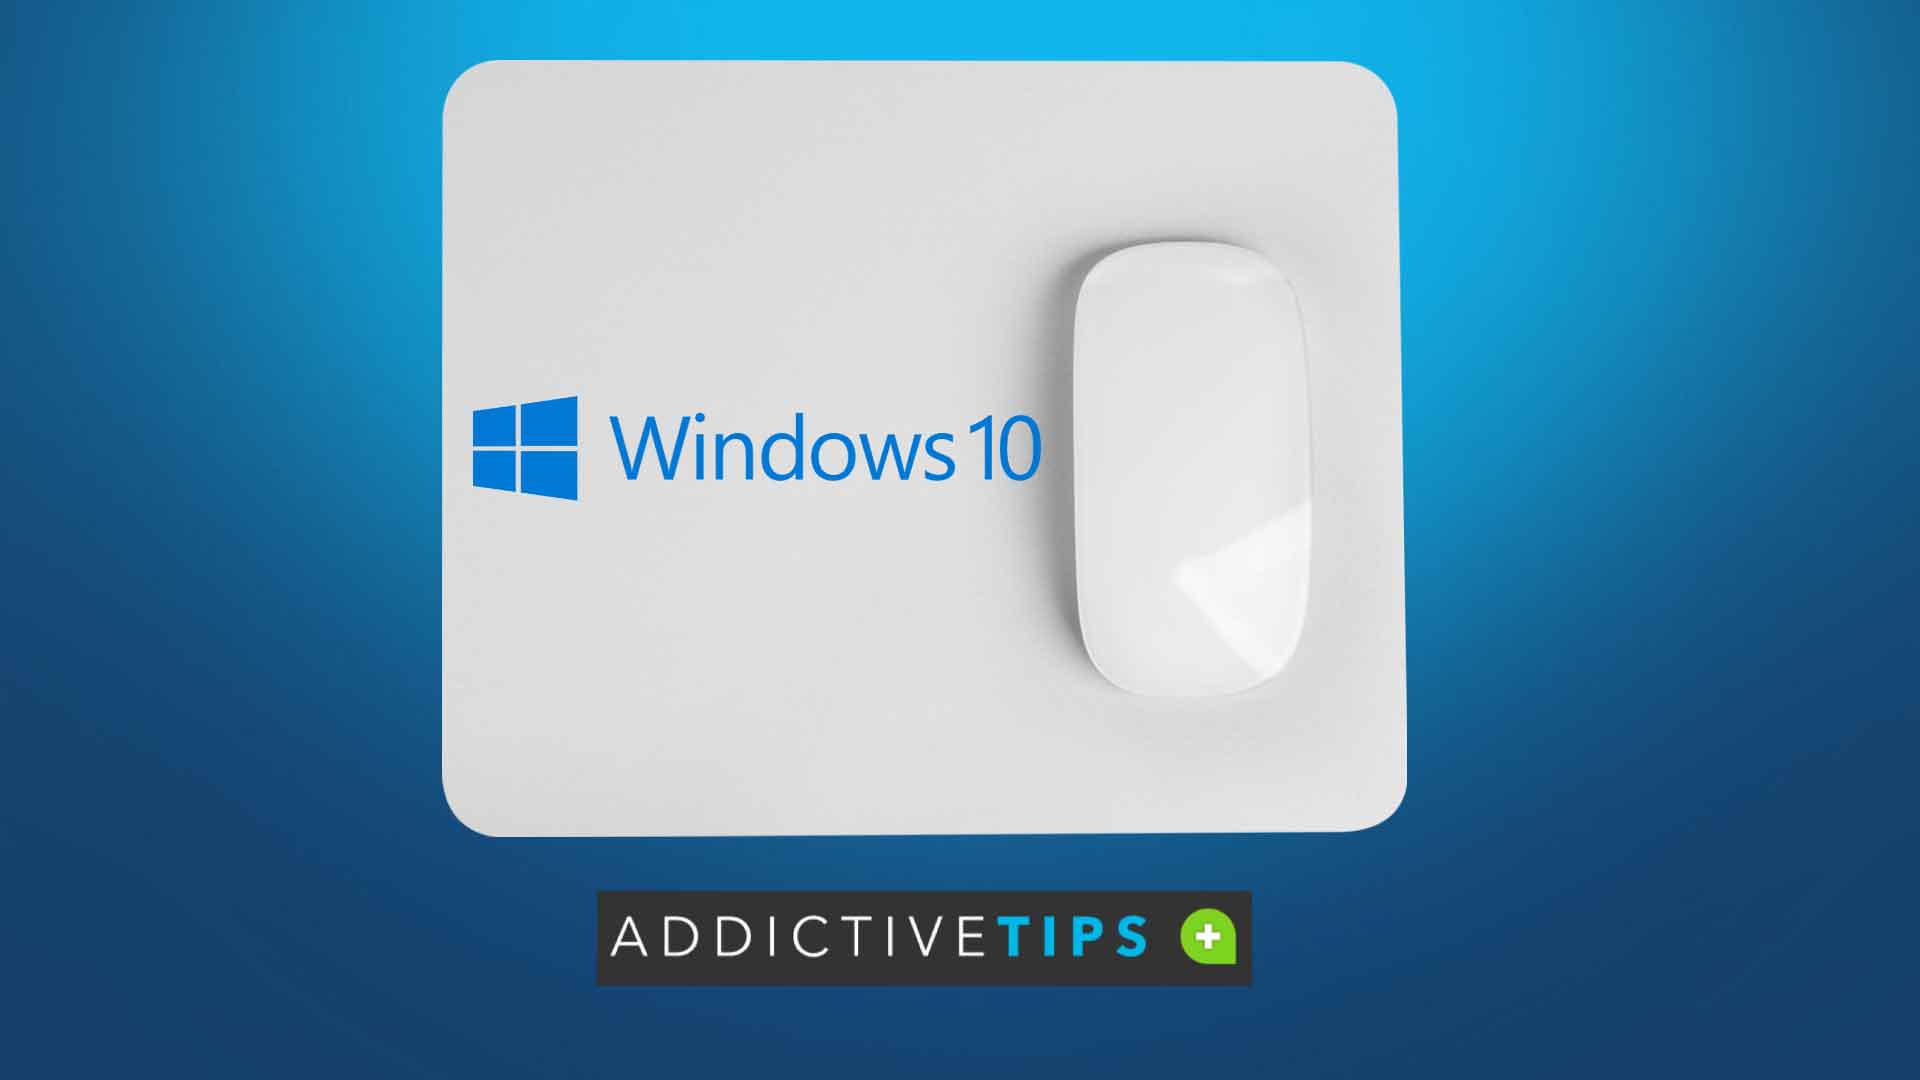 Mouse Disappeared on Windows 10? Try These 8 Fixes | AddictiveTips